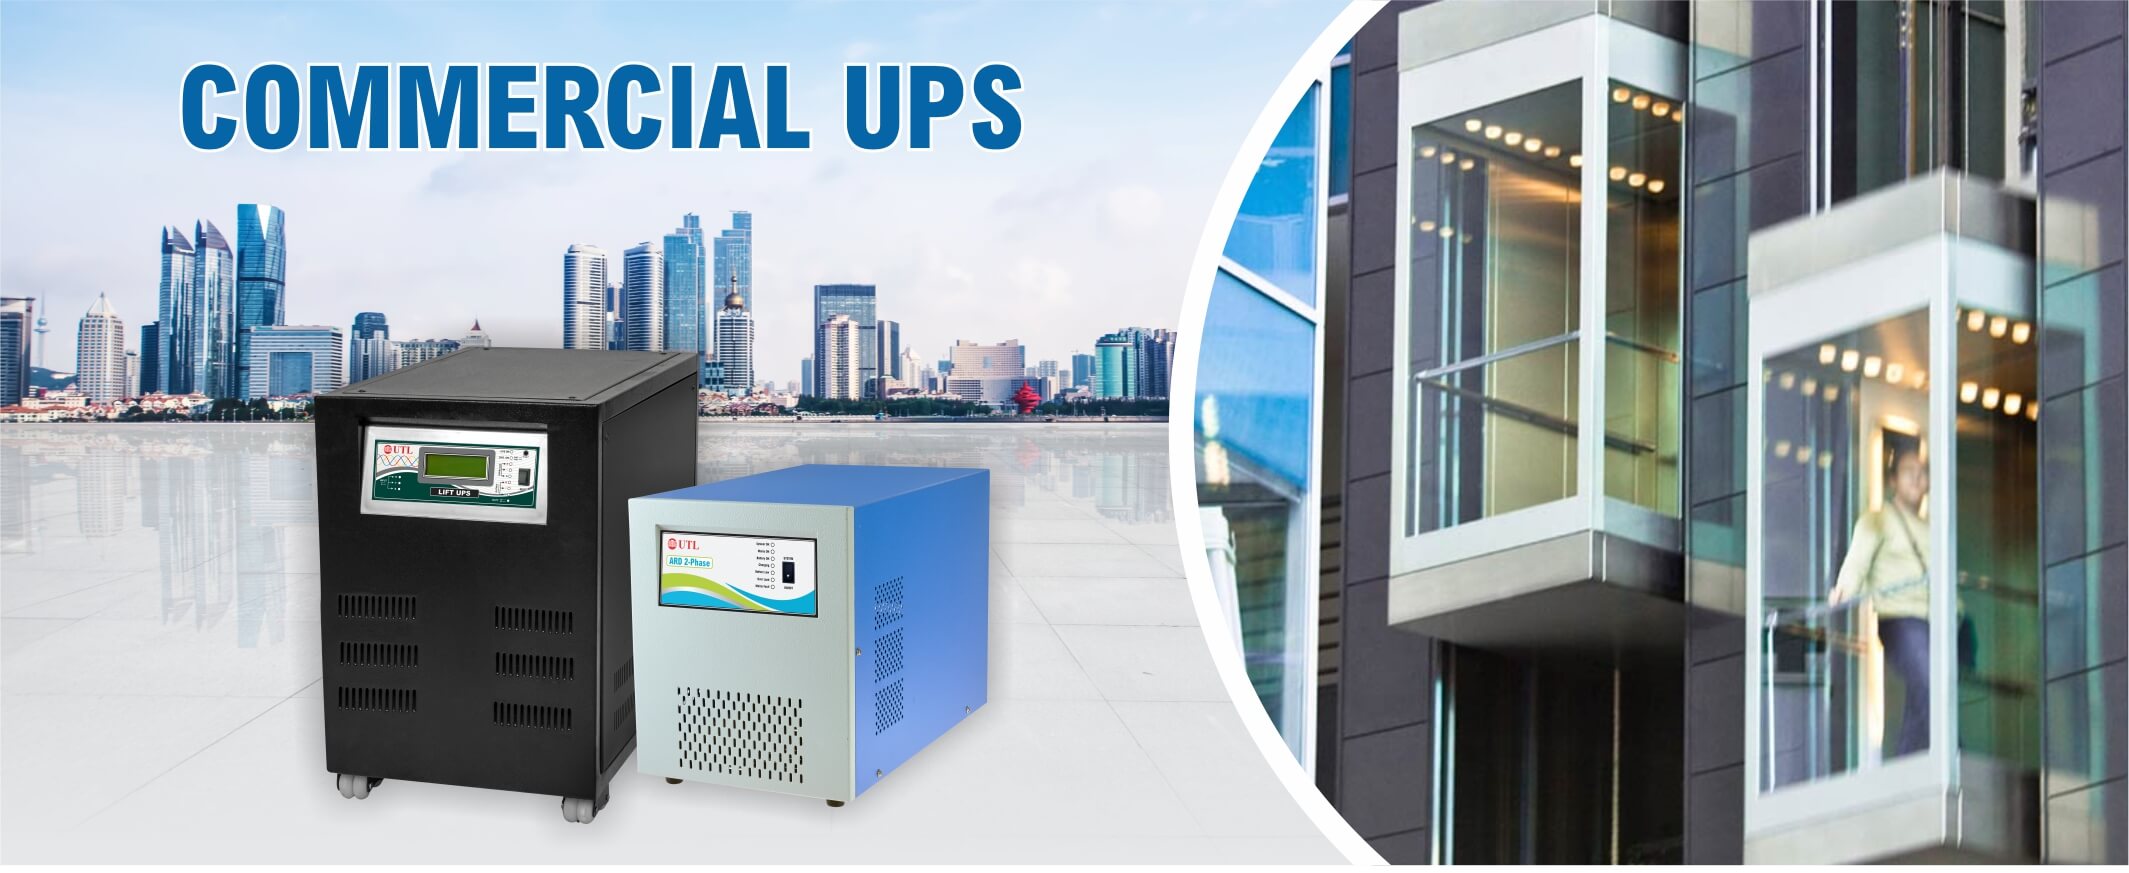 Buy 1 Phase, 2 Phase and 3 Phase Commercial UPS at Cheapest Price